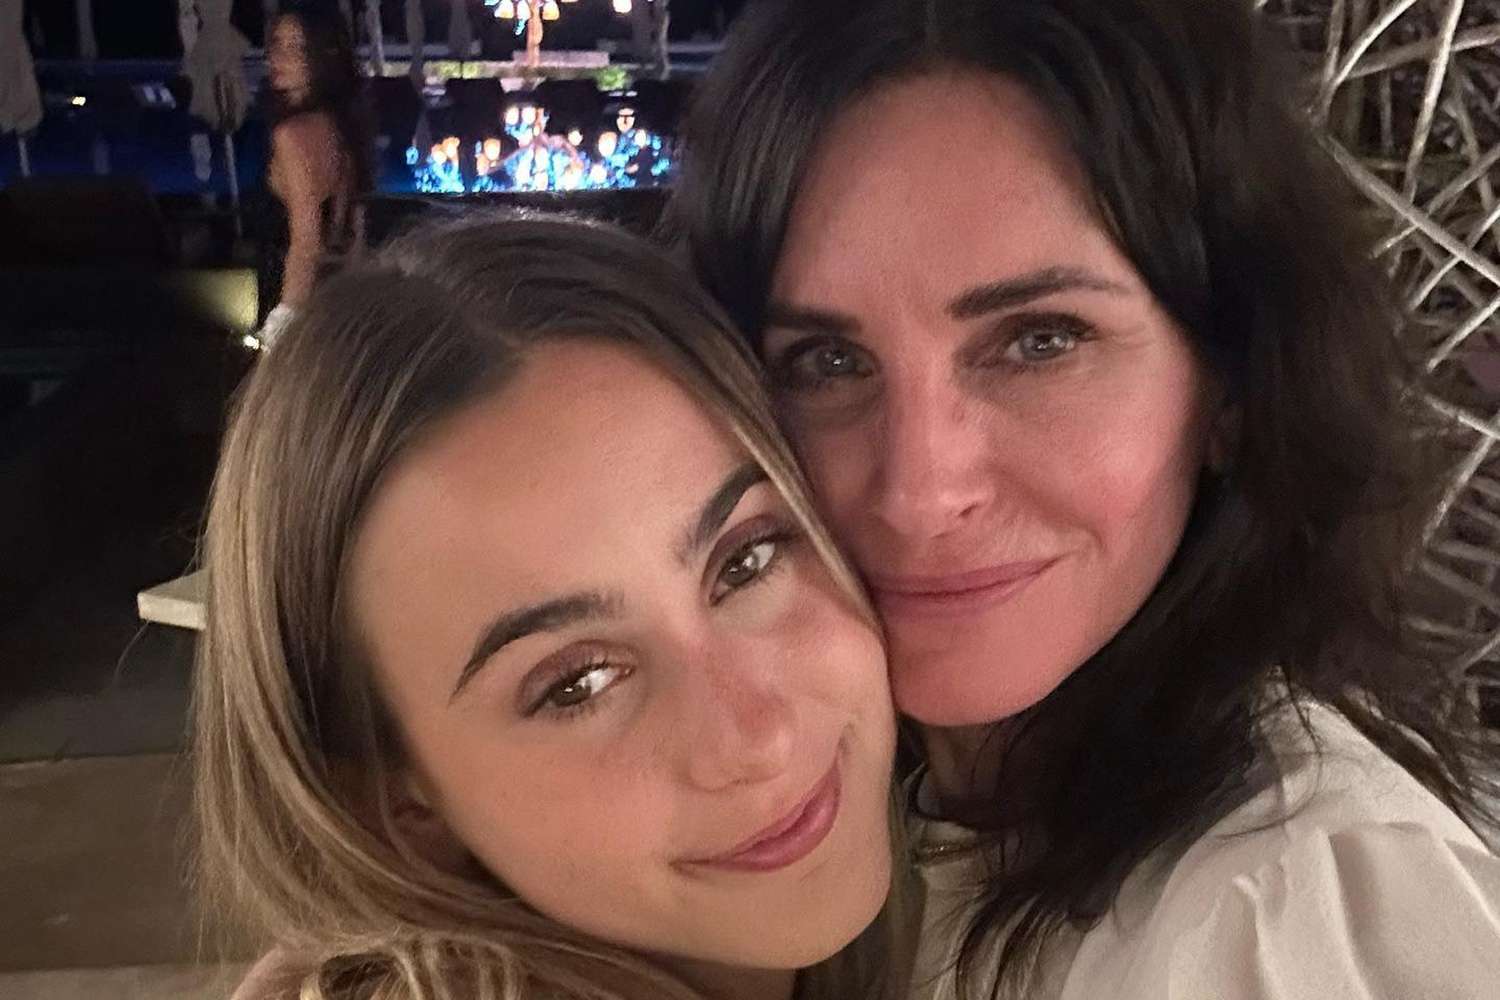 Courteney Cox Admits She Wishes She Was a 'Firmer Parent' When Daughter Coco Was Younger